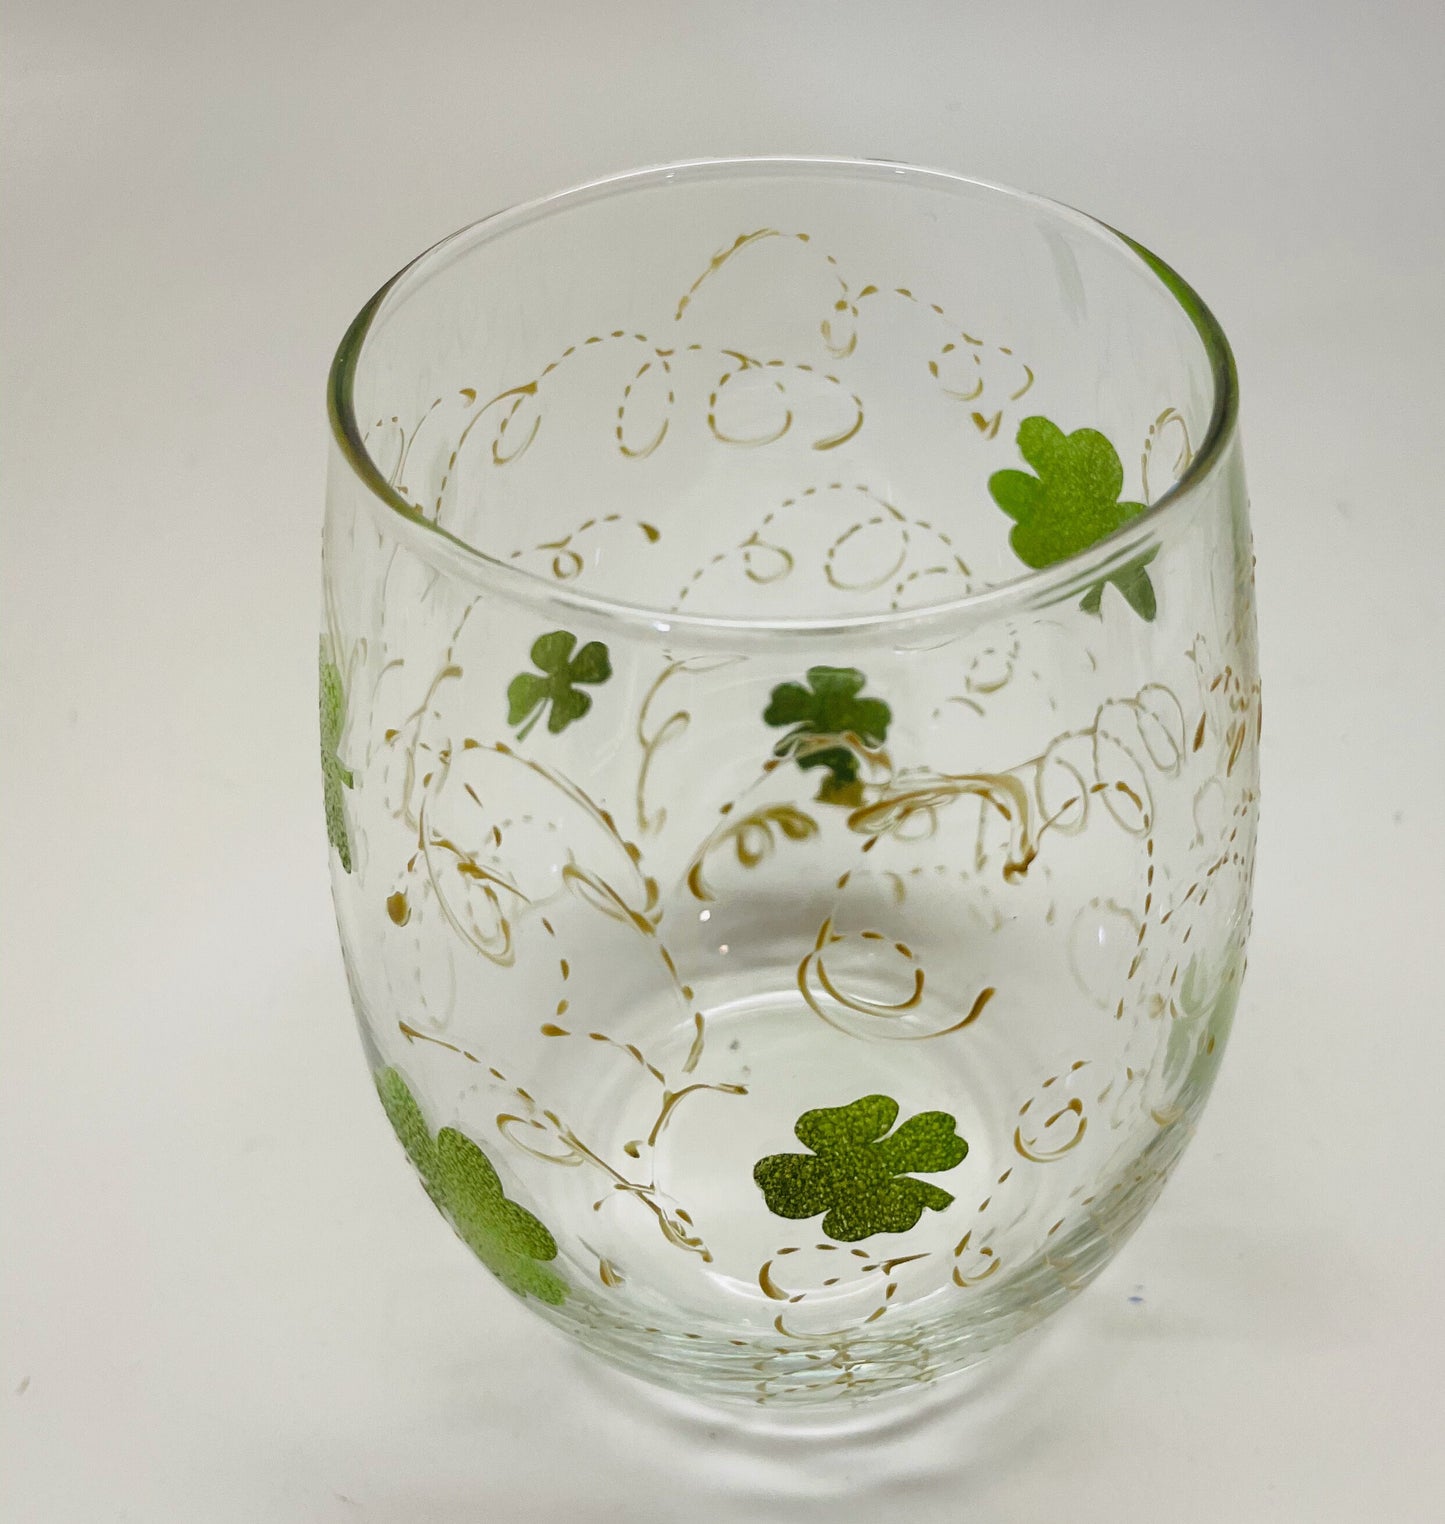 St. Patricks Day Clovers and Gold Swirls, Hand Painted Glassware, Gift for her, Gift for Friend, Housewarming, Party glassware